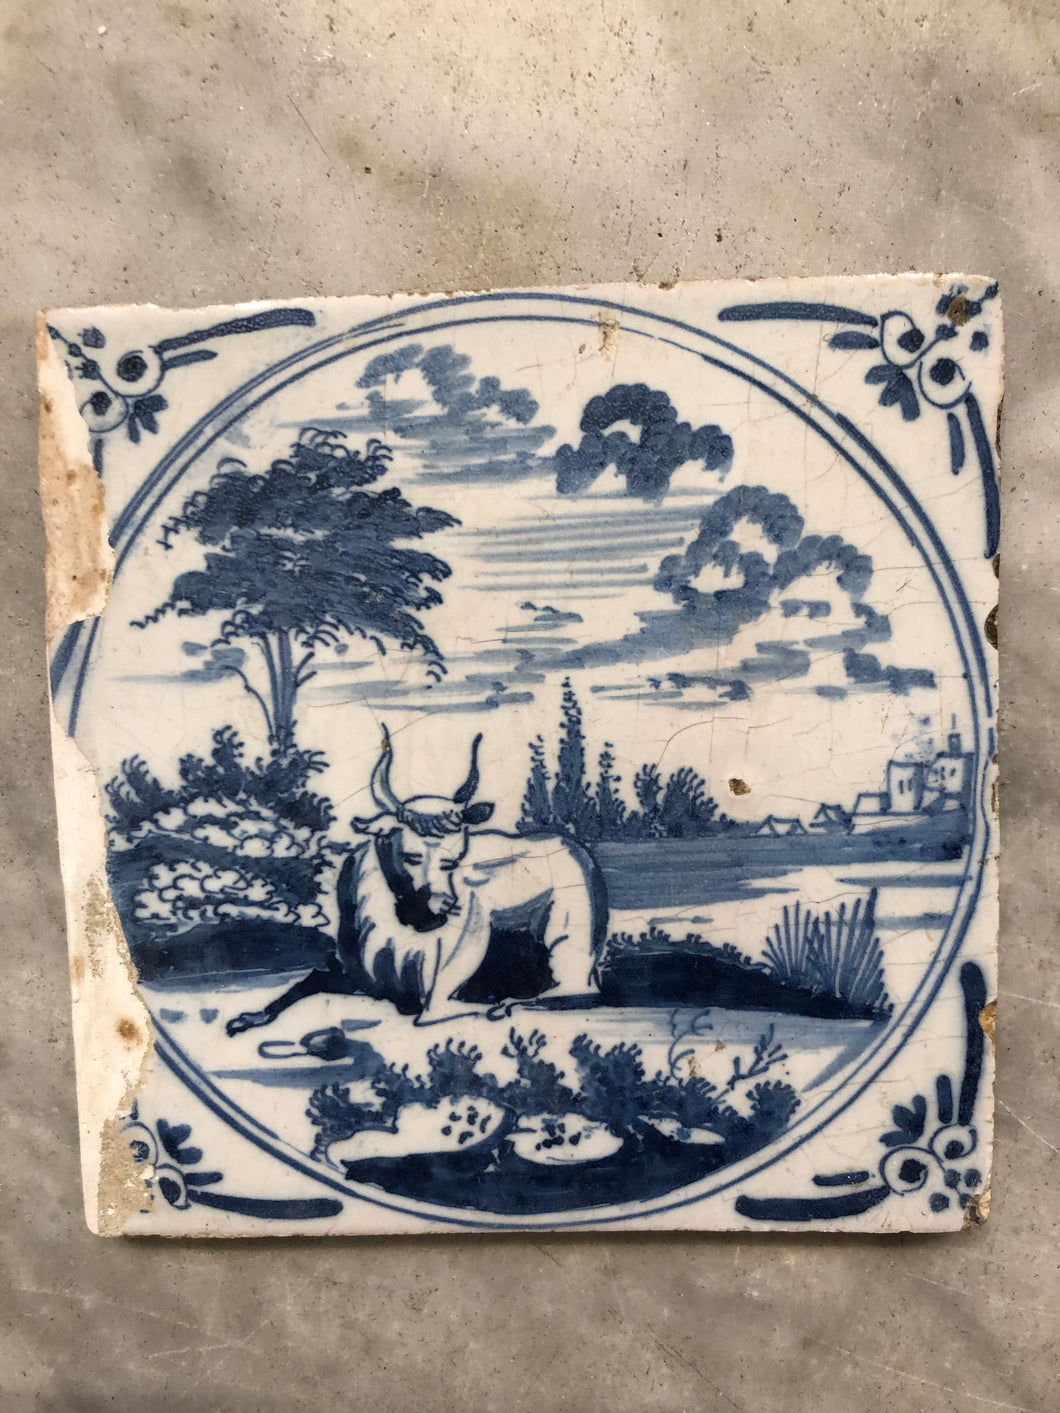 18th century Delft handpainted dutch tile with cow